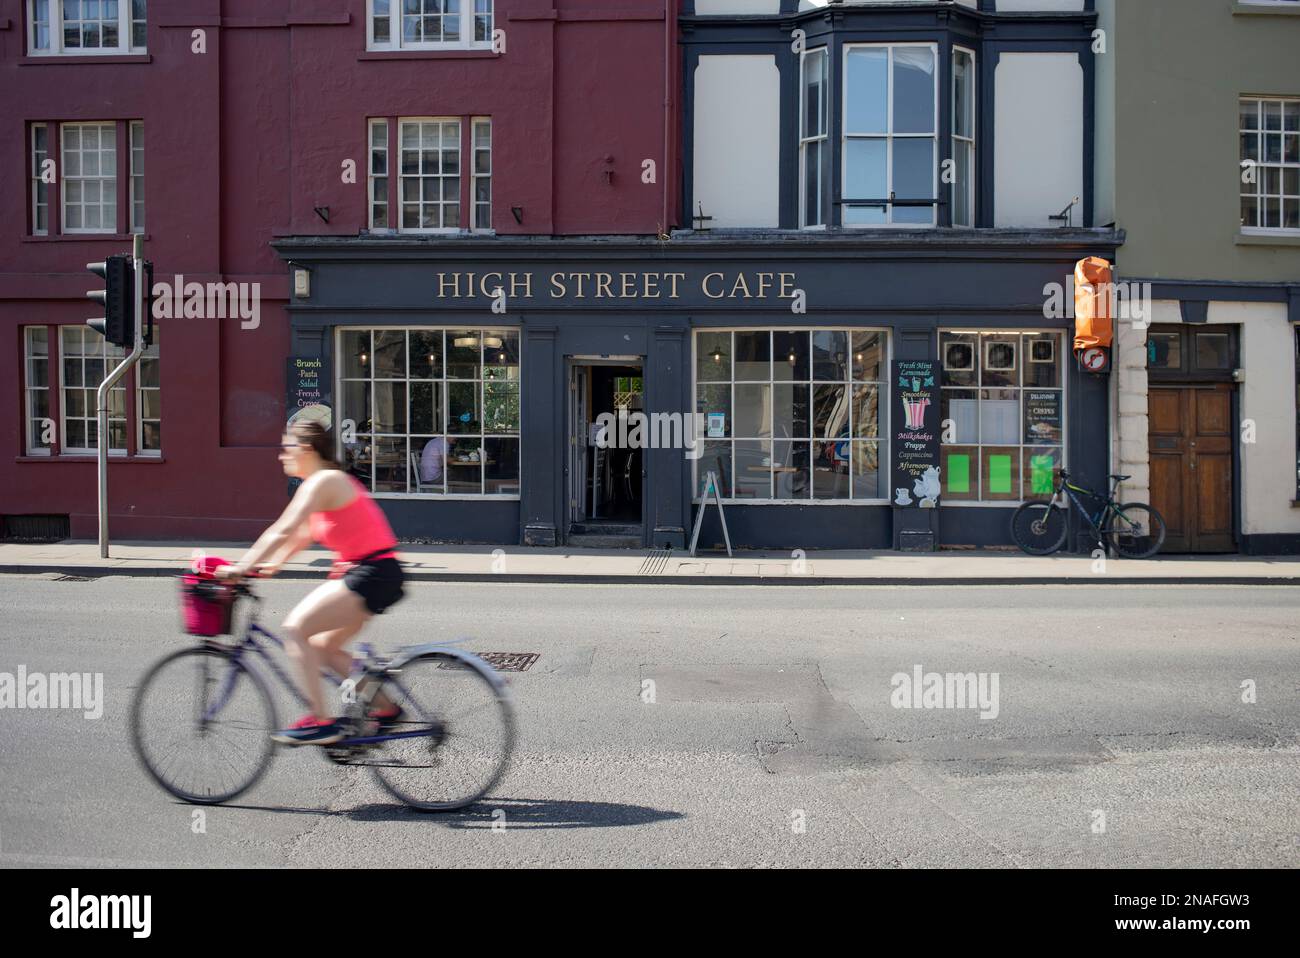 Cyclist rides by a cafe along a street in Oxford, UK; Oxford, England Stock Photo